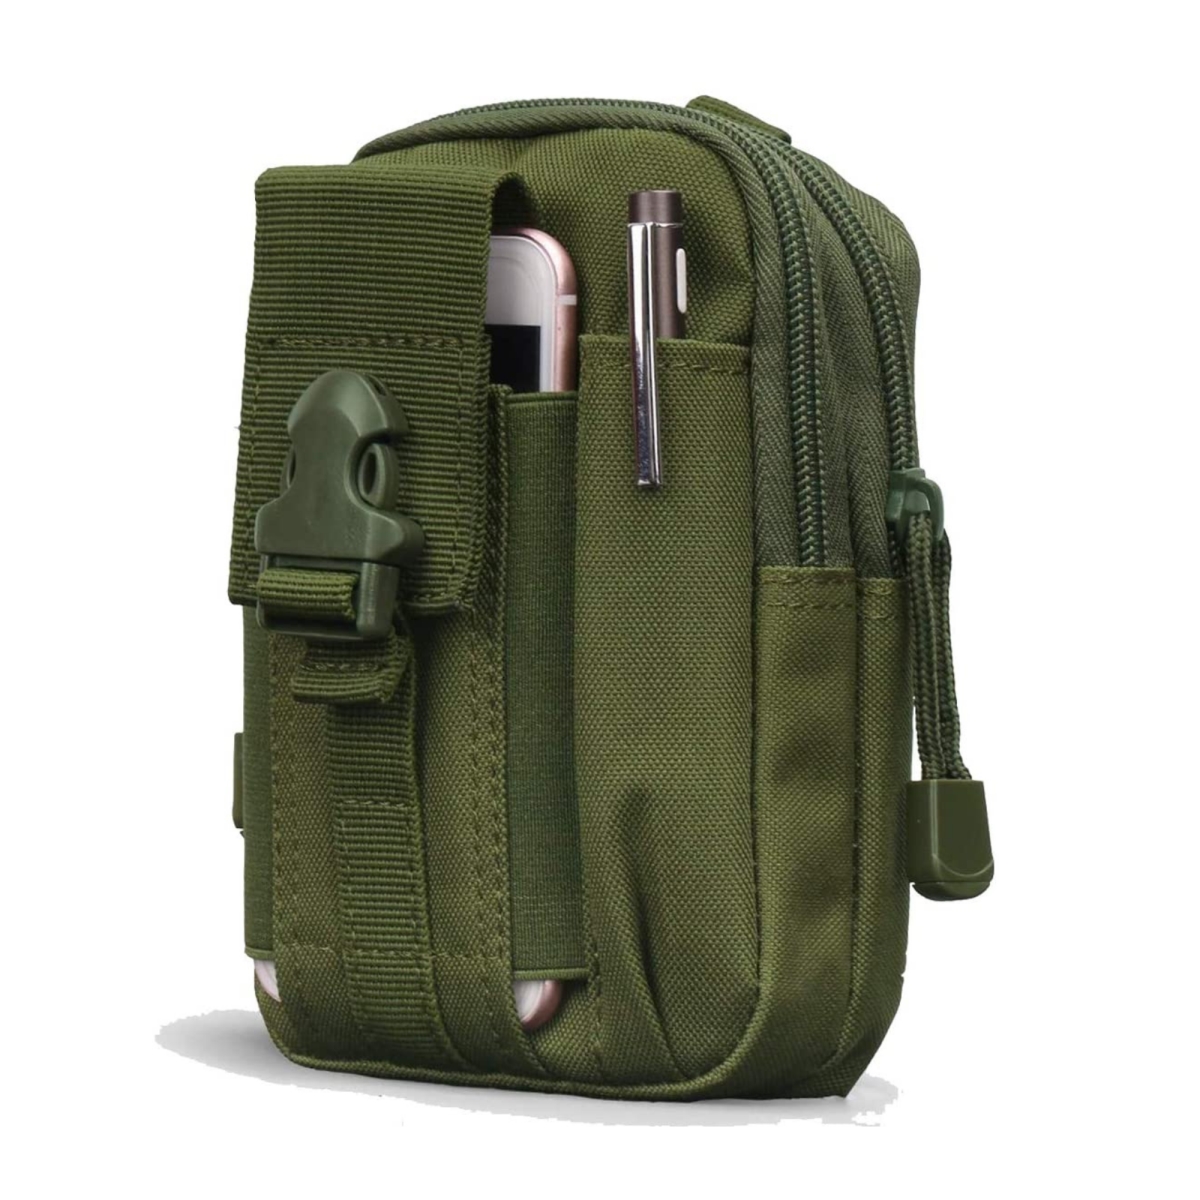 JG-SLNGBAG2-ARMGRN Tactical MOLLE Military Pouch Waist Bag for Hiking, Running & Outdoor Activities, Army Green